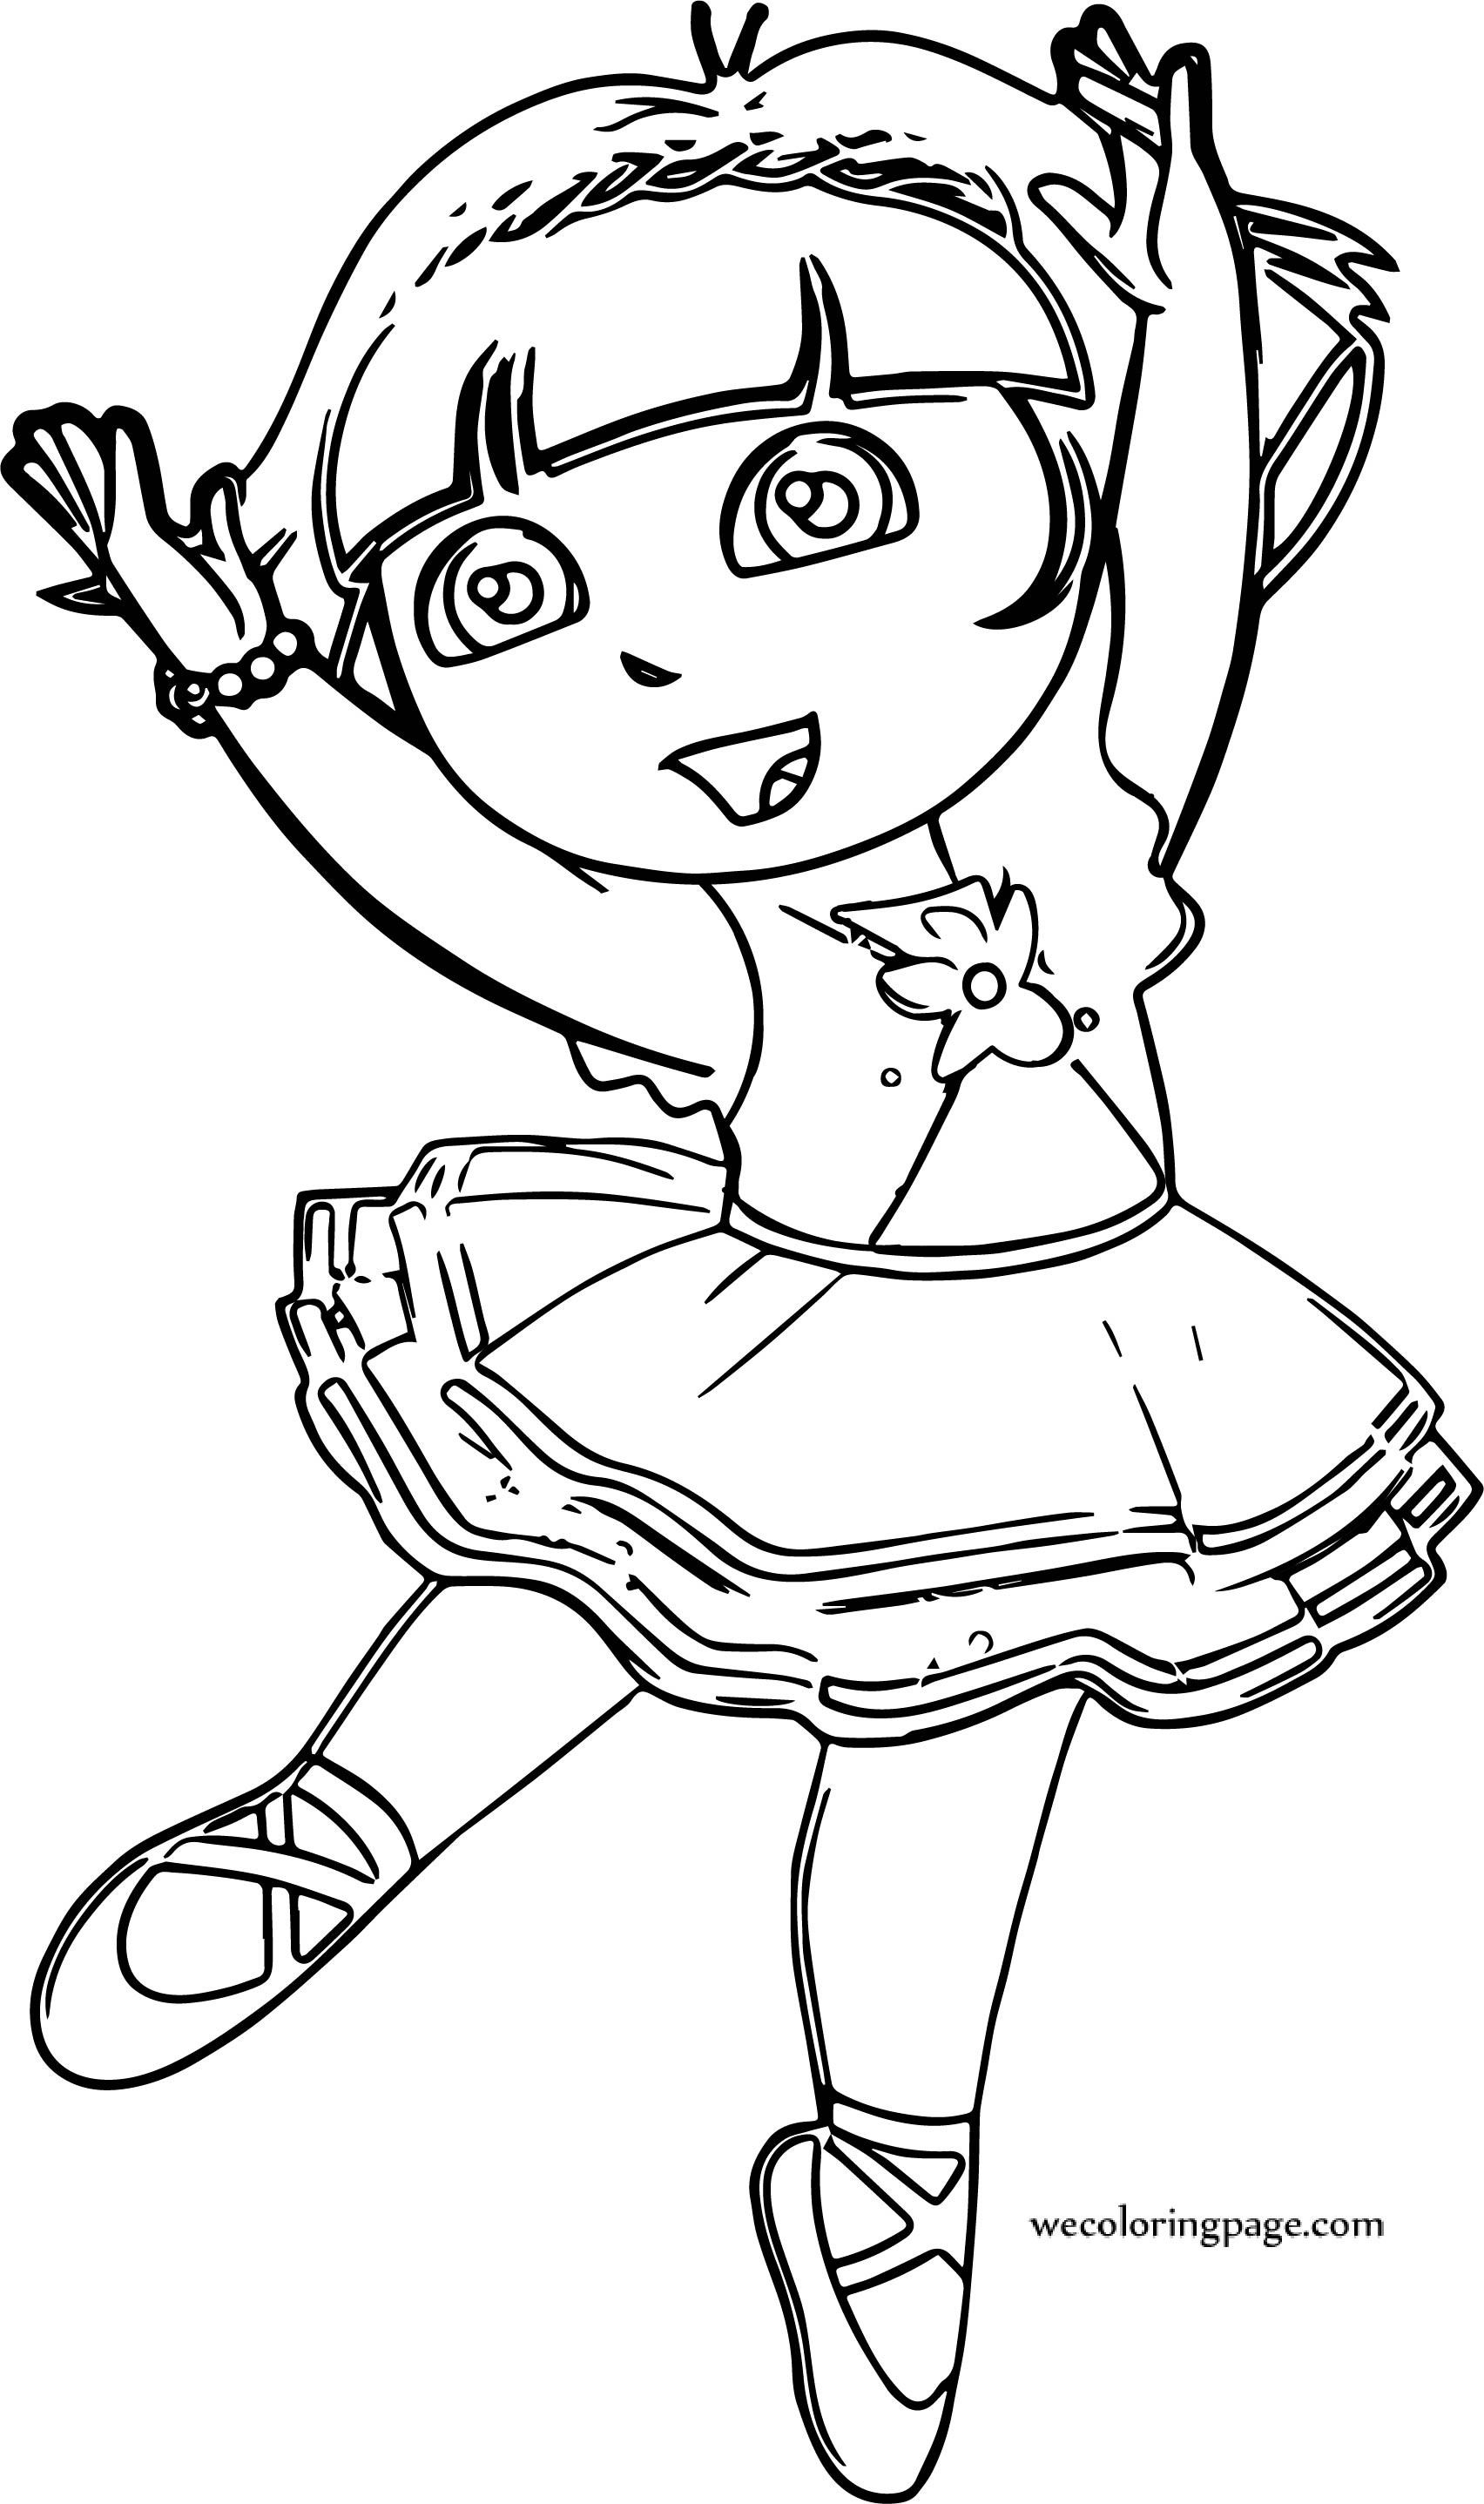 Ballerina Coloring Pages For Girls
 I Ballerina Dora Girl Coloring Page